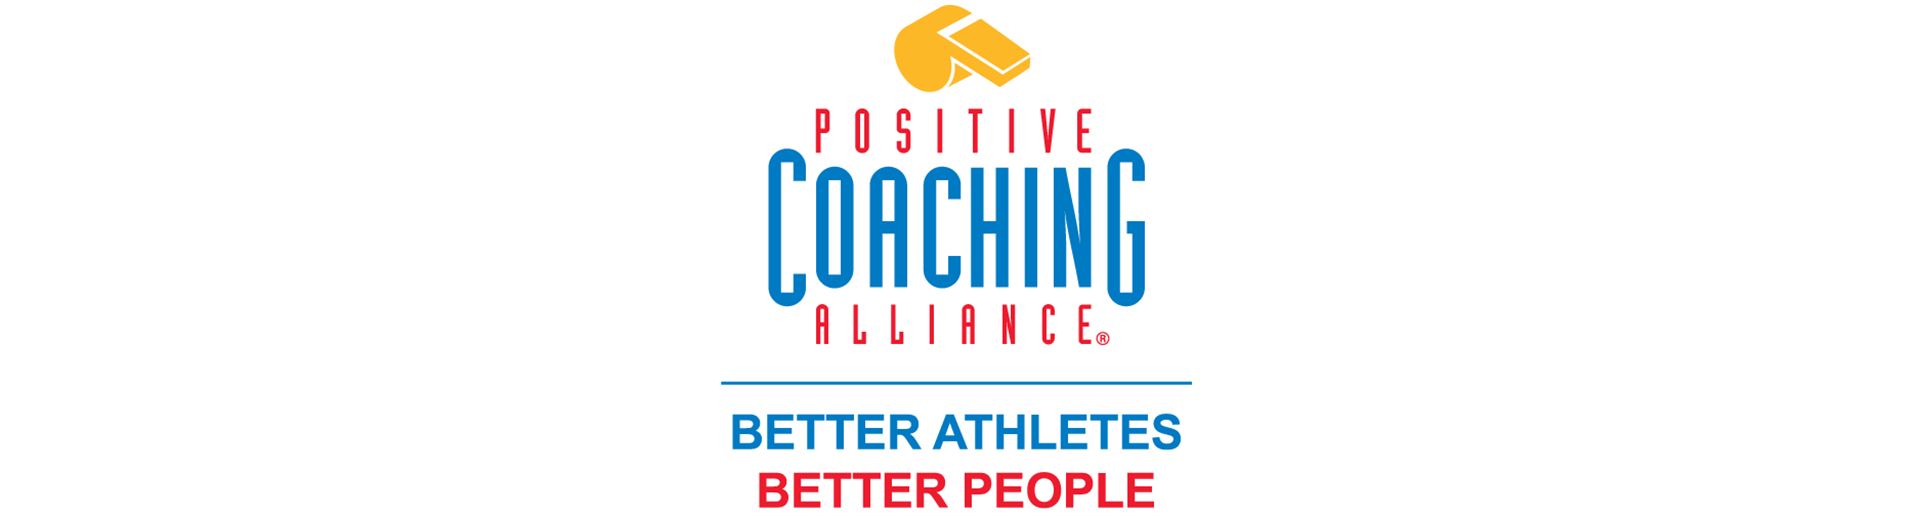 The Power of Positive by Positive Coaching Alliance